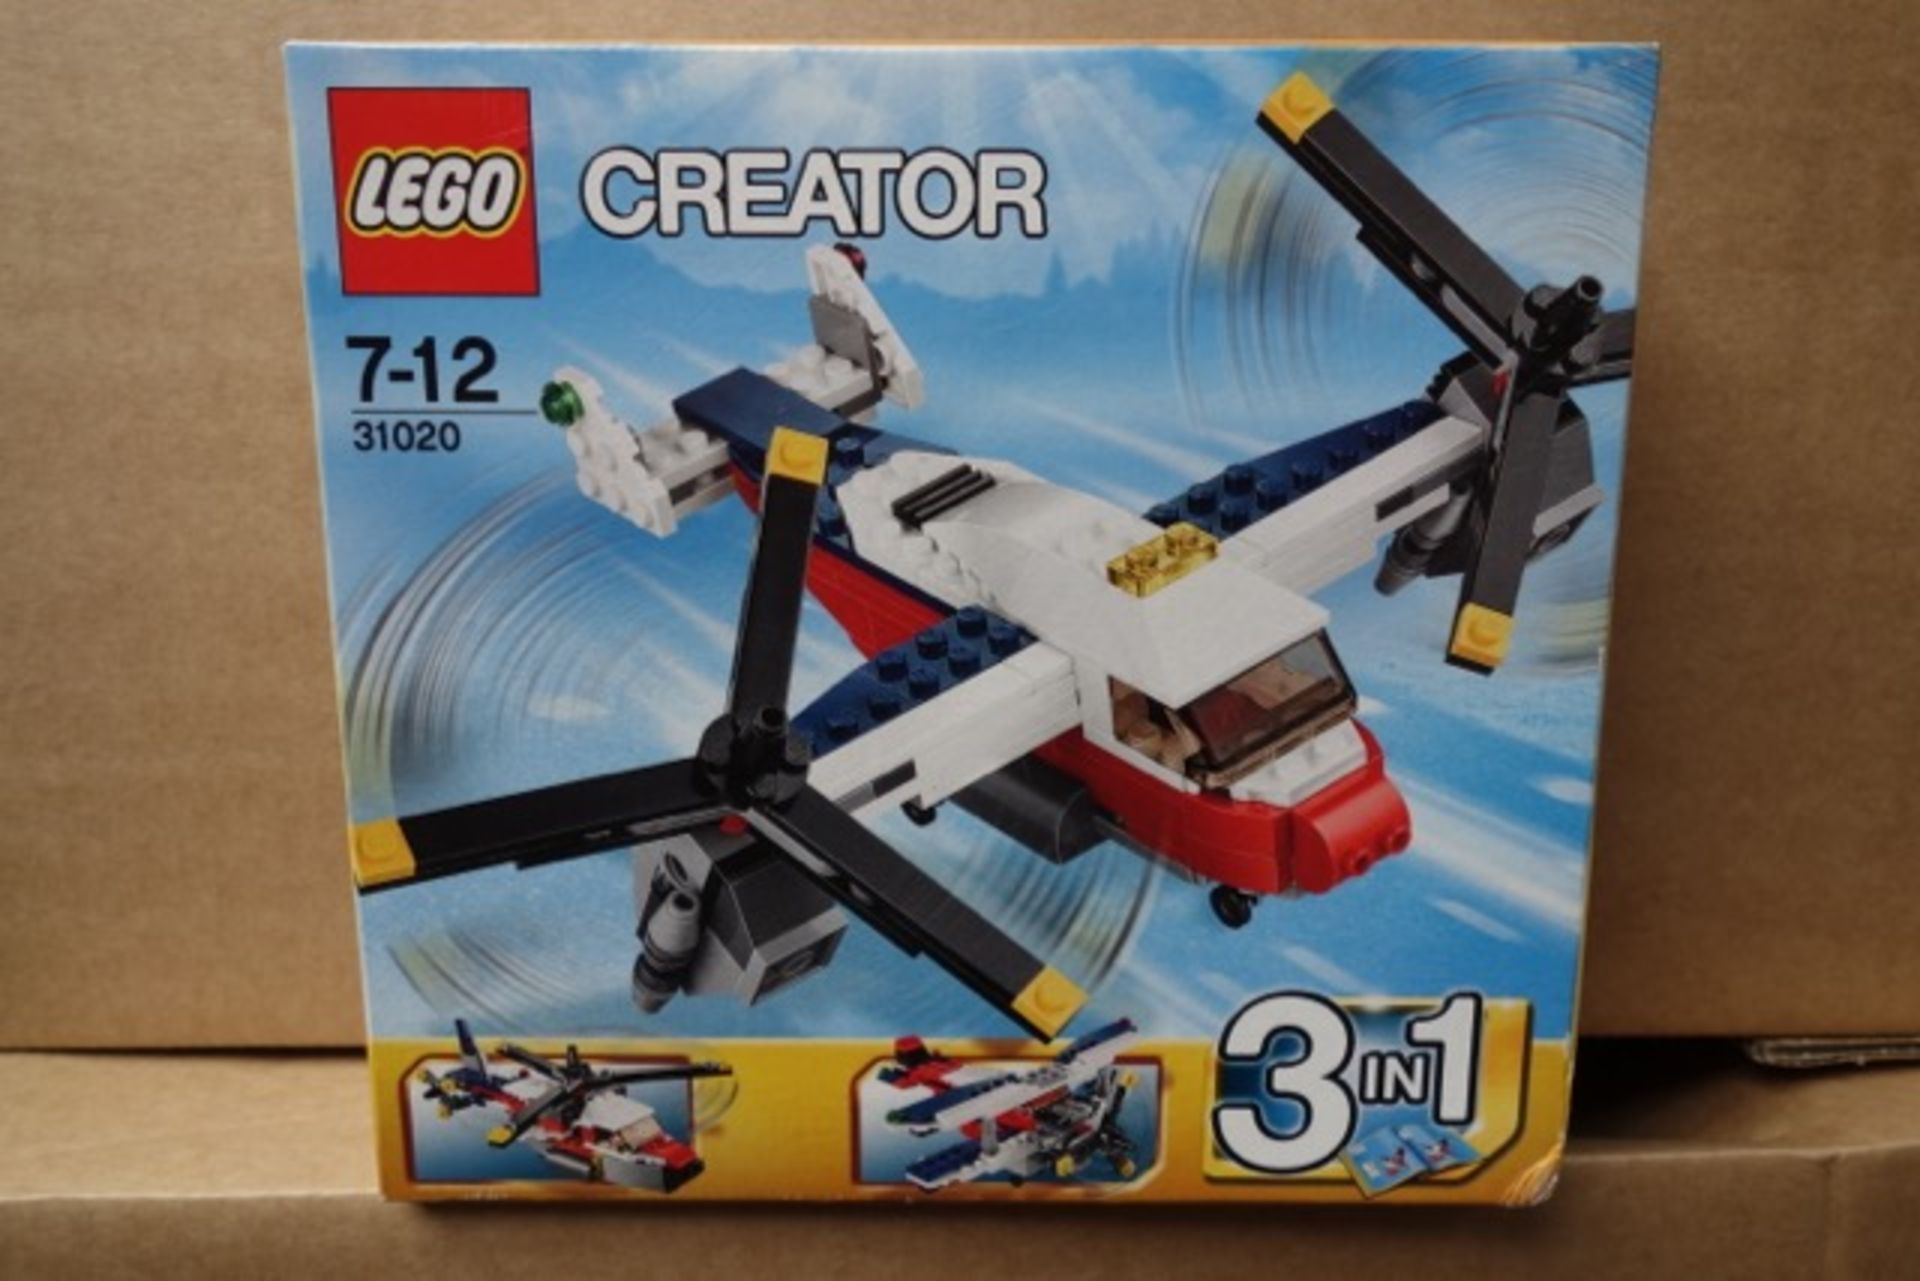 10 x Brand New - Lego Creator 31020 3 in 1 Playsets